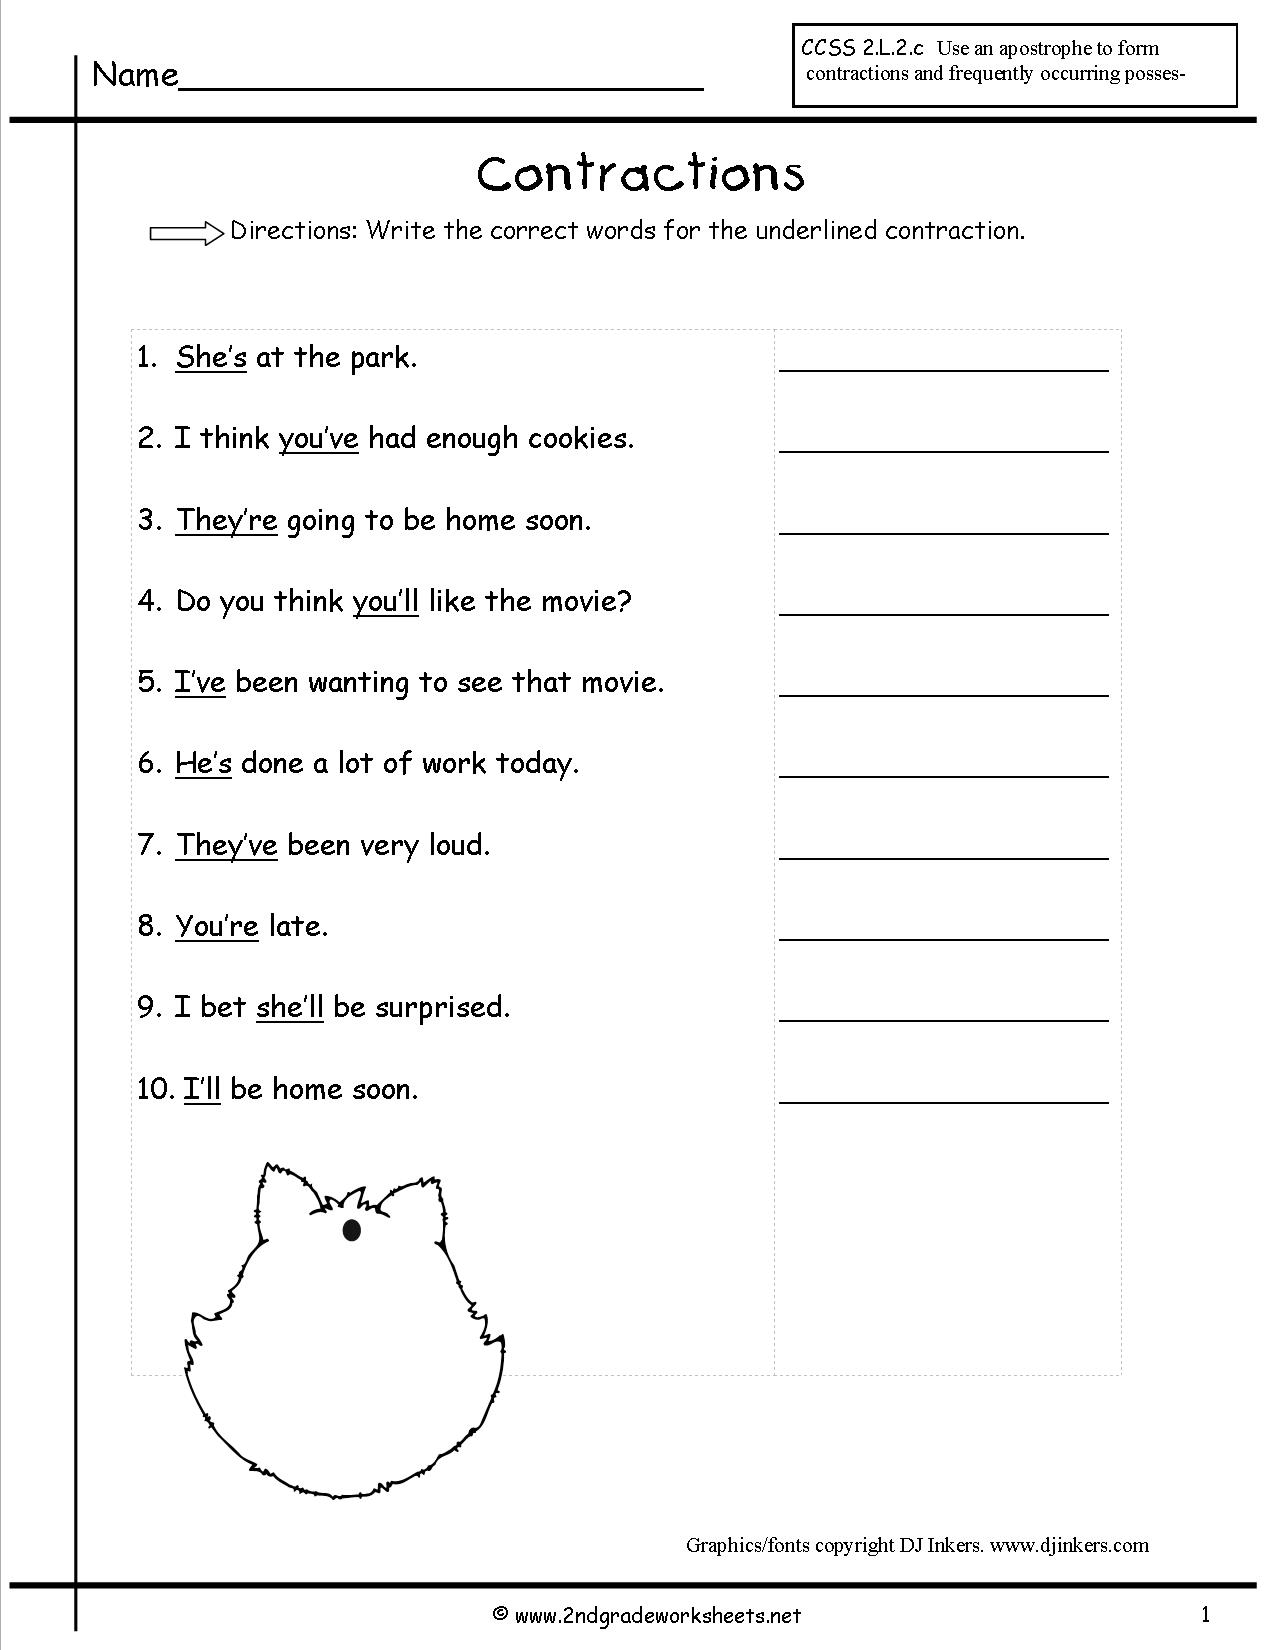 17-best-images-of-3rd-grade-worksheets-contraction-practice